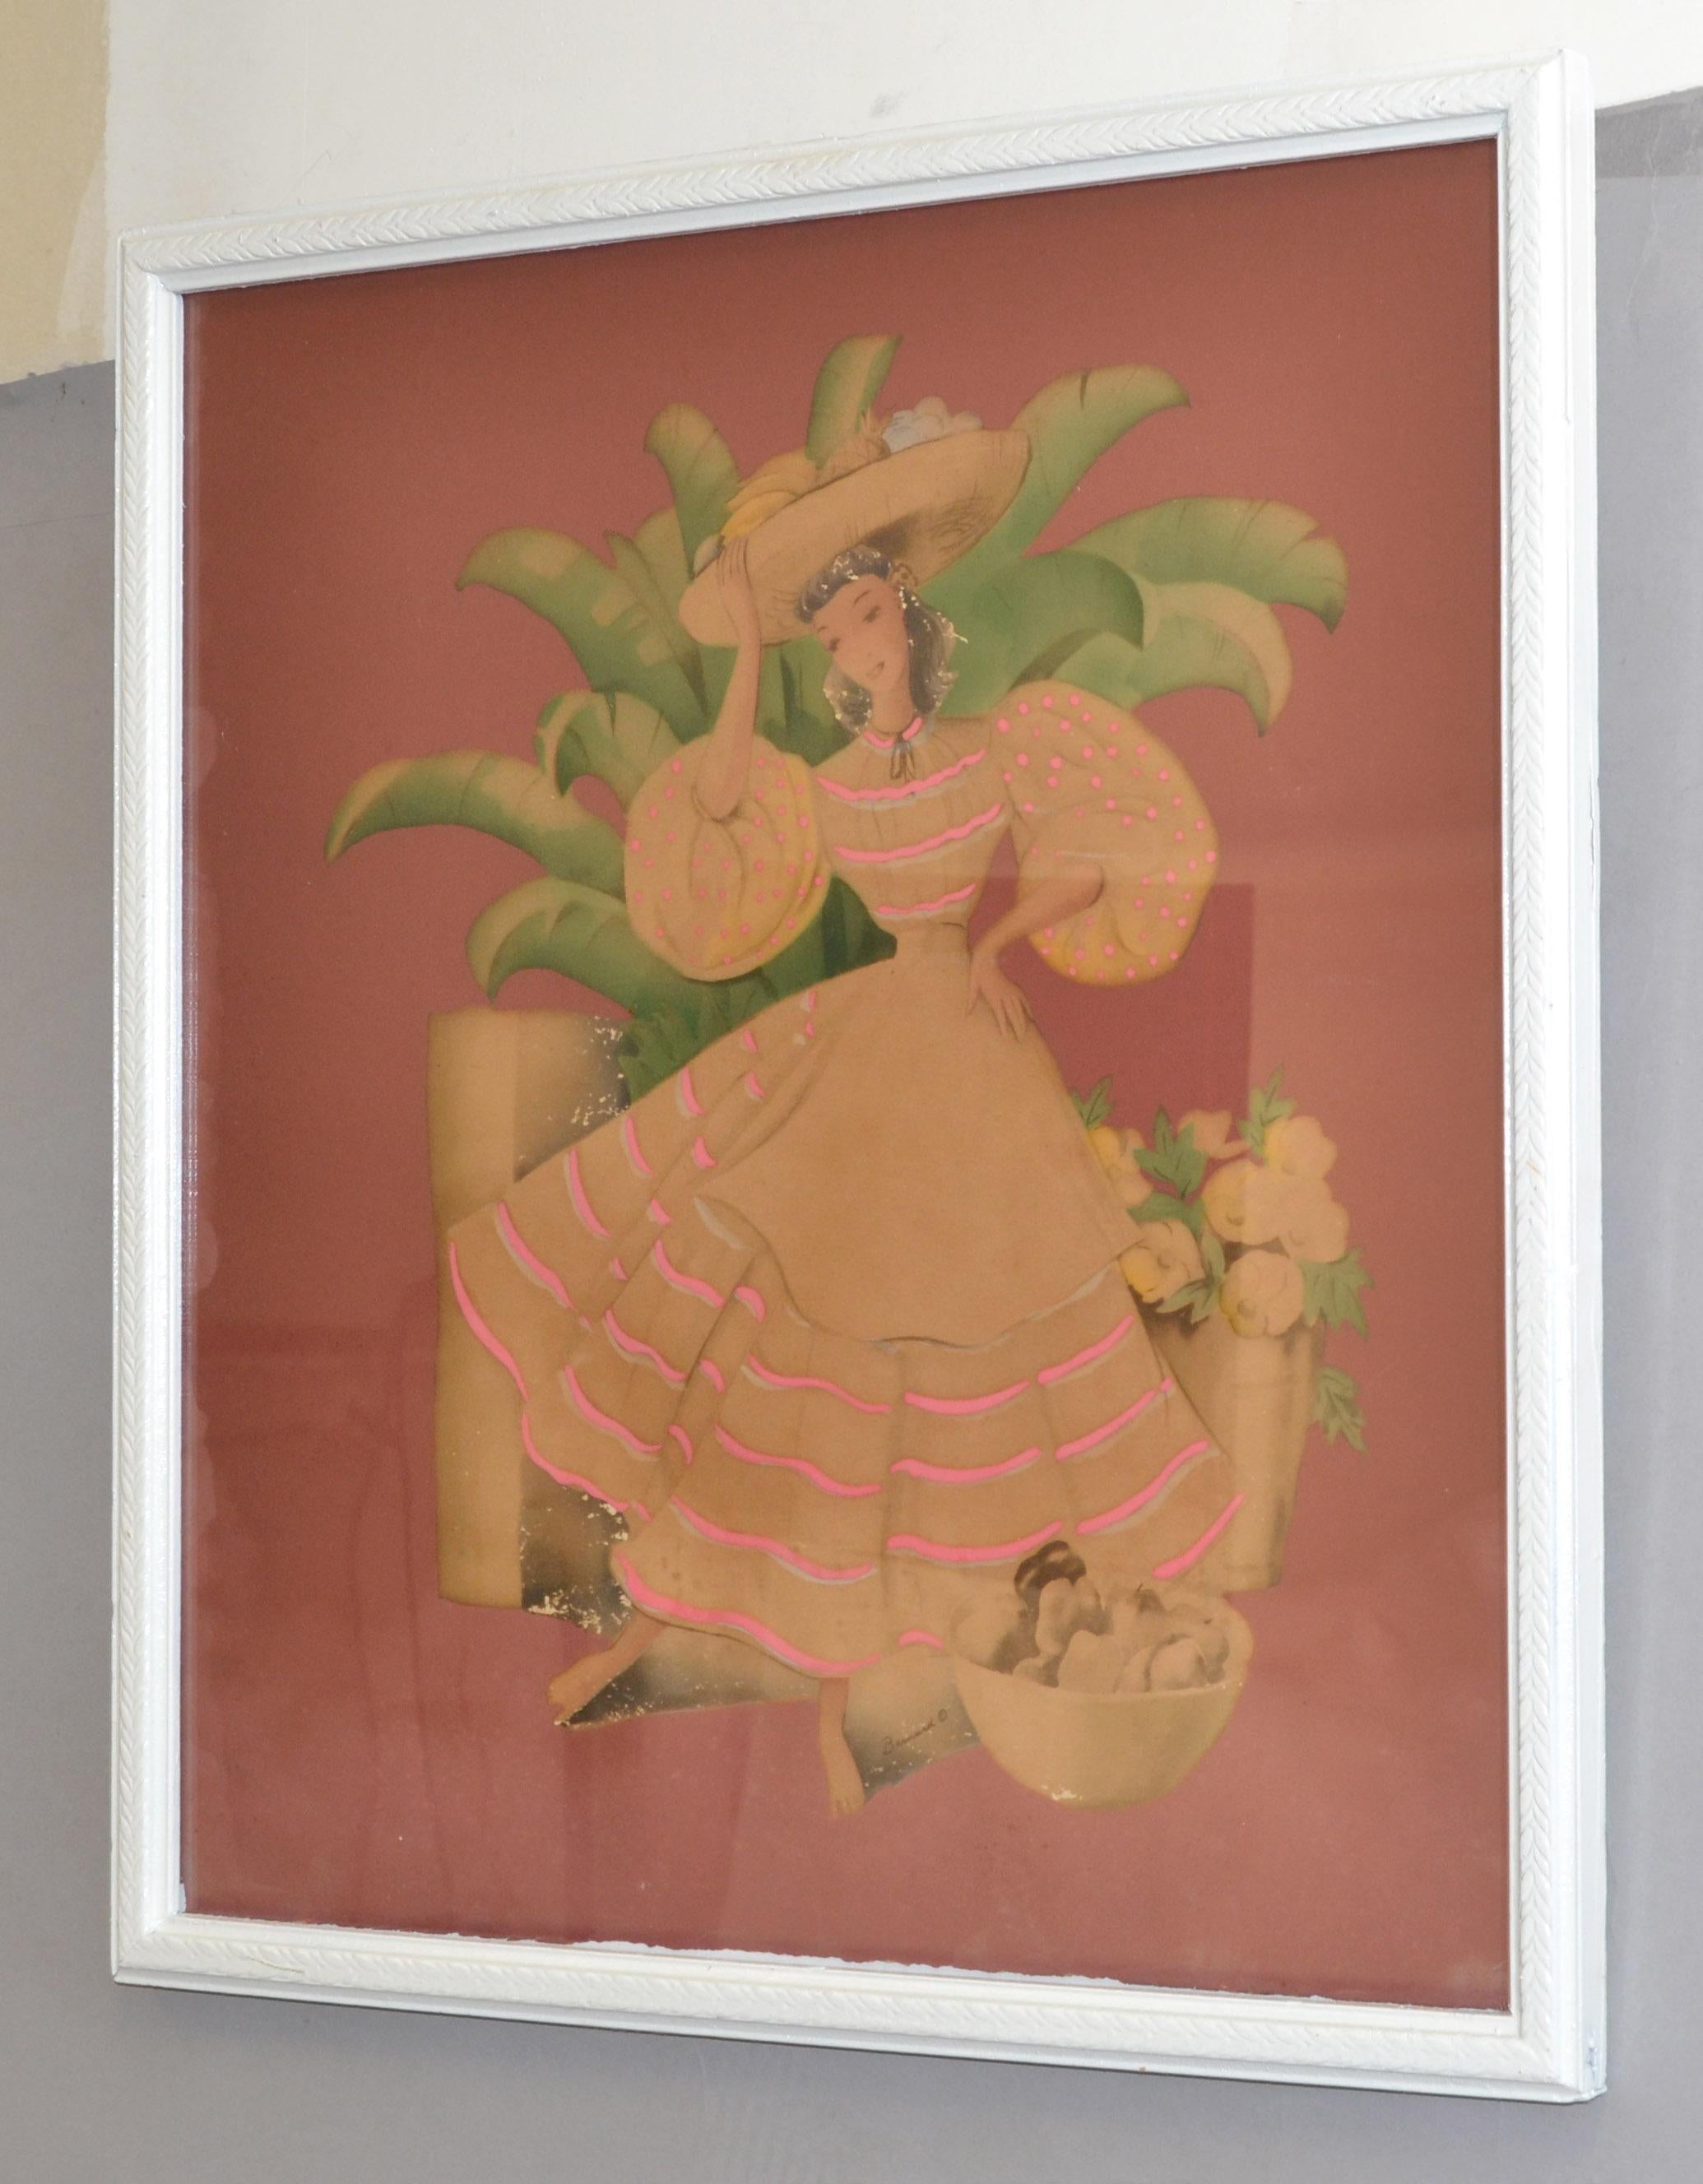 Vintage Bernard Watercolor Framed behind Glass Columbian Young Woman carries a Fruit Basket on her Head. 
Signed on Bernard, Copyright.
Wood Frame is whitewashed and ornate.
In vintage condition with wear to History as shown in the pictures.
Art